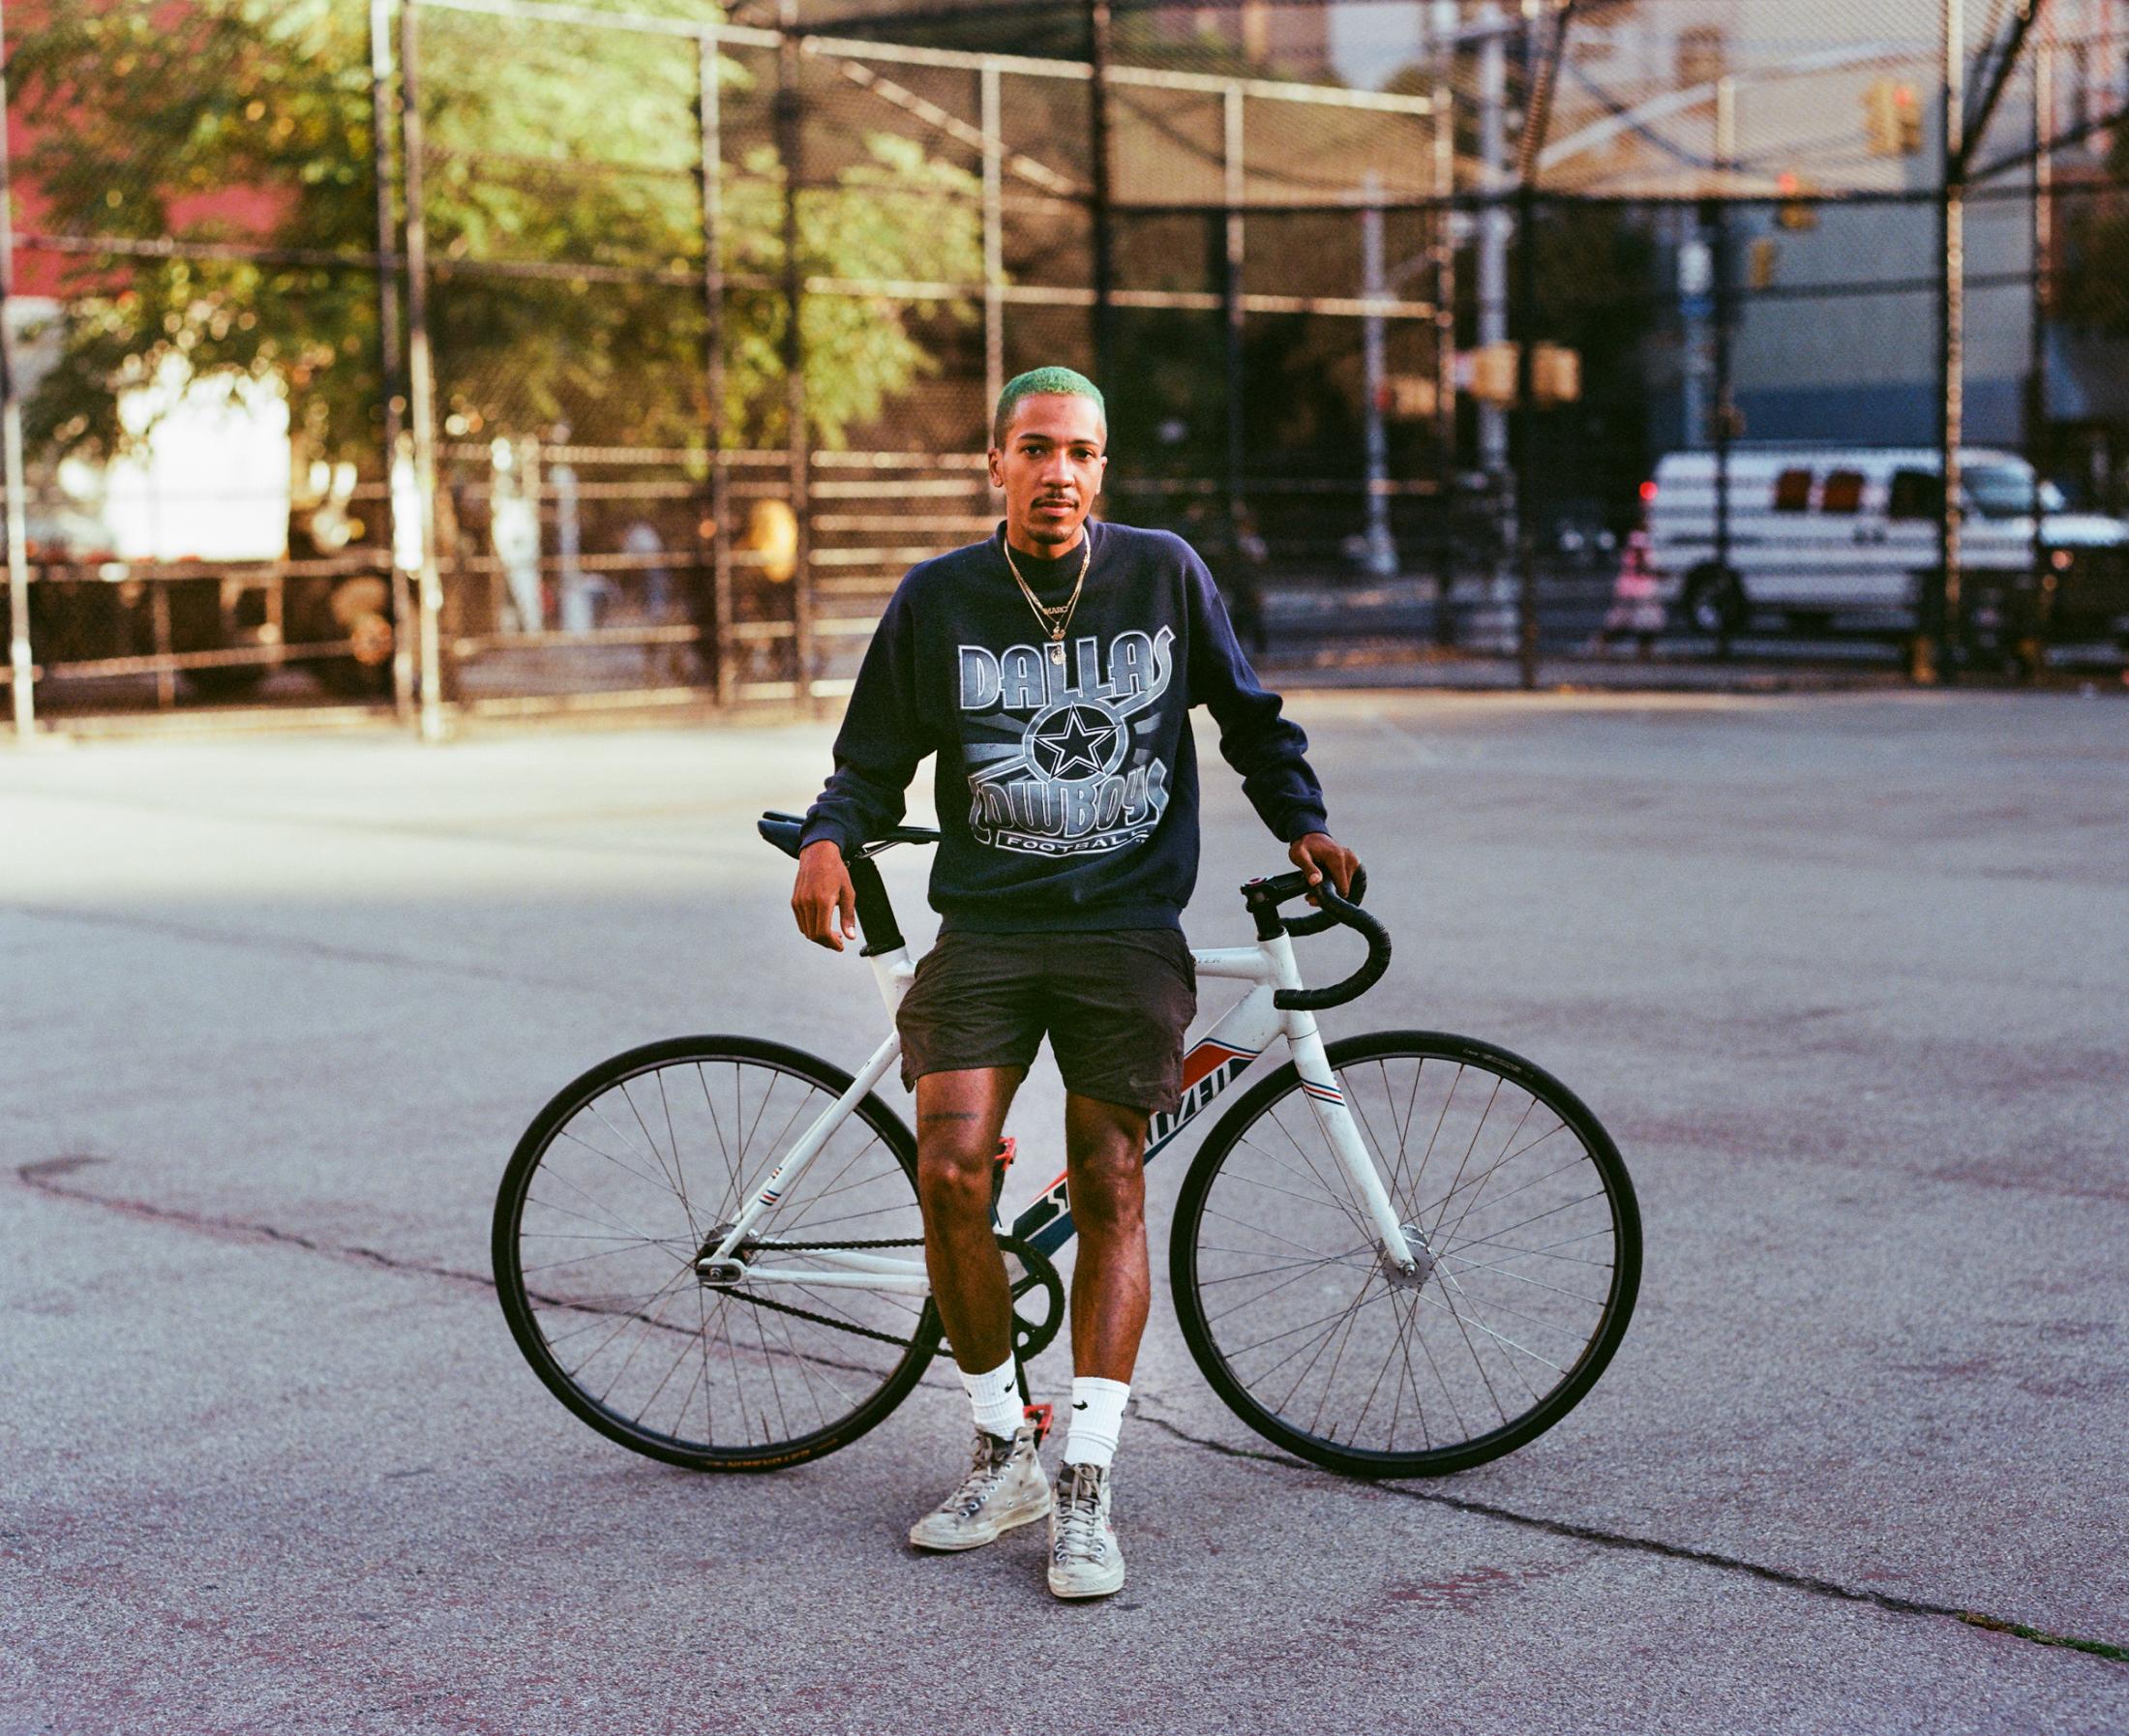 Marc-Anthony Muckle on September 27, 2019 in NYC. Photo essay on Bike Messengers.